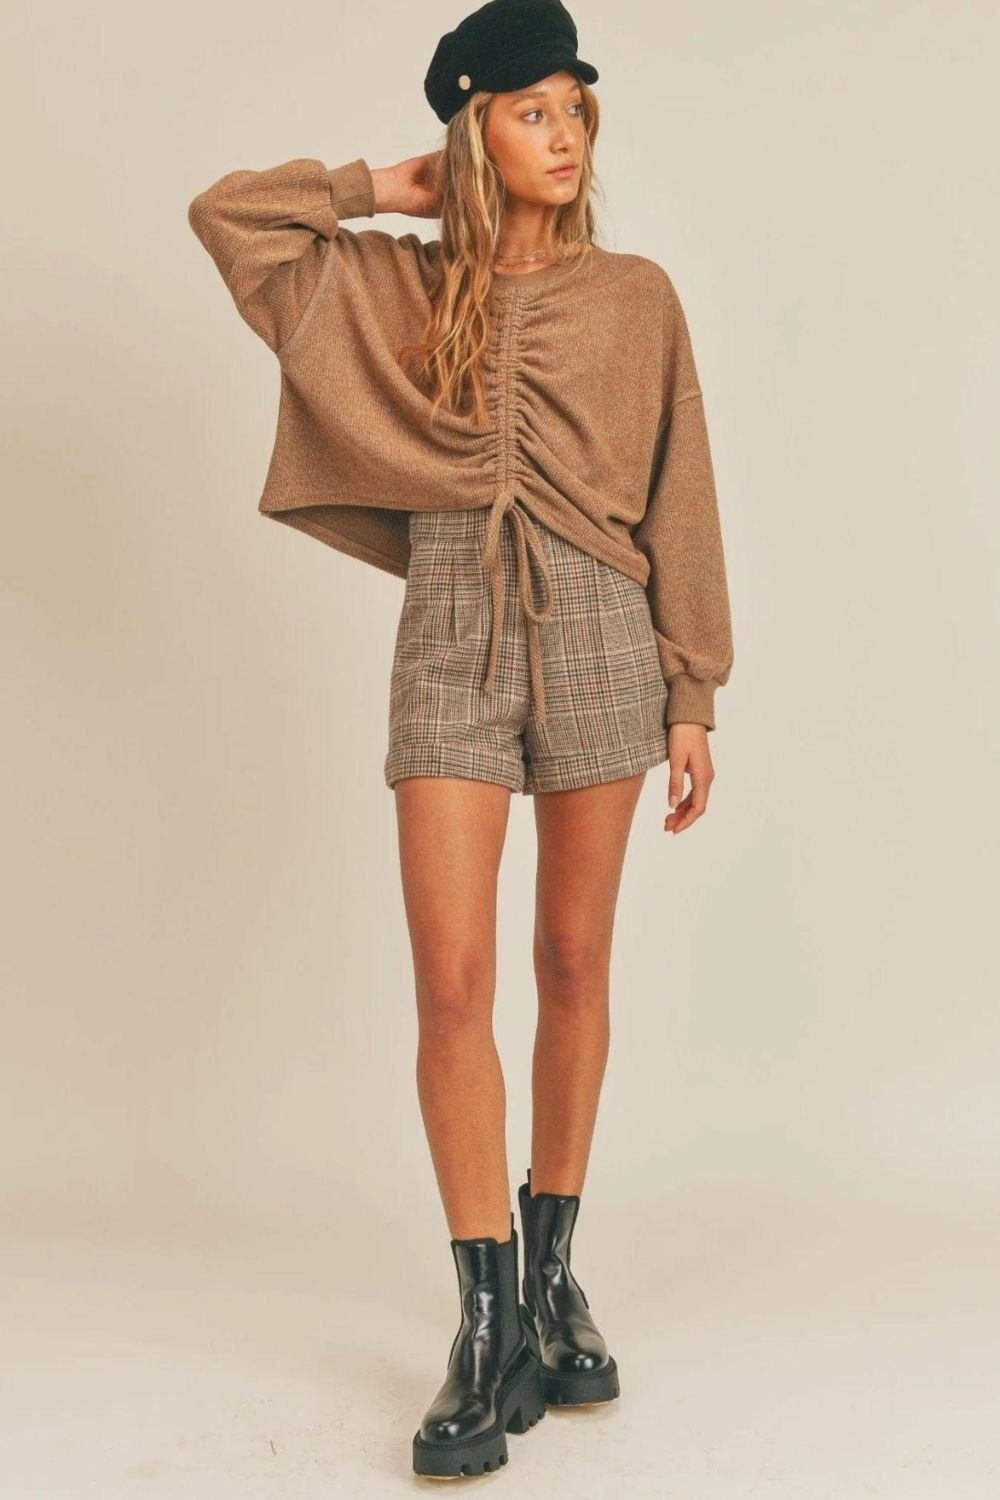 Women's Plaid Wool Shorts | Sage The Label | Brown Multi - Women's Shorts - Blooming Daily